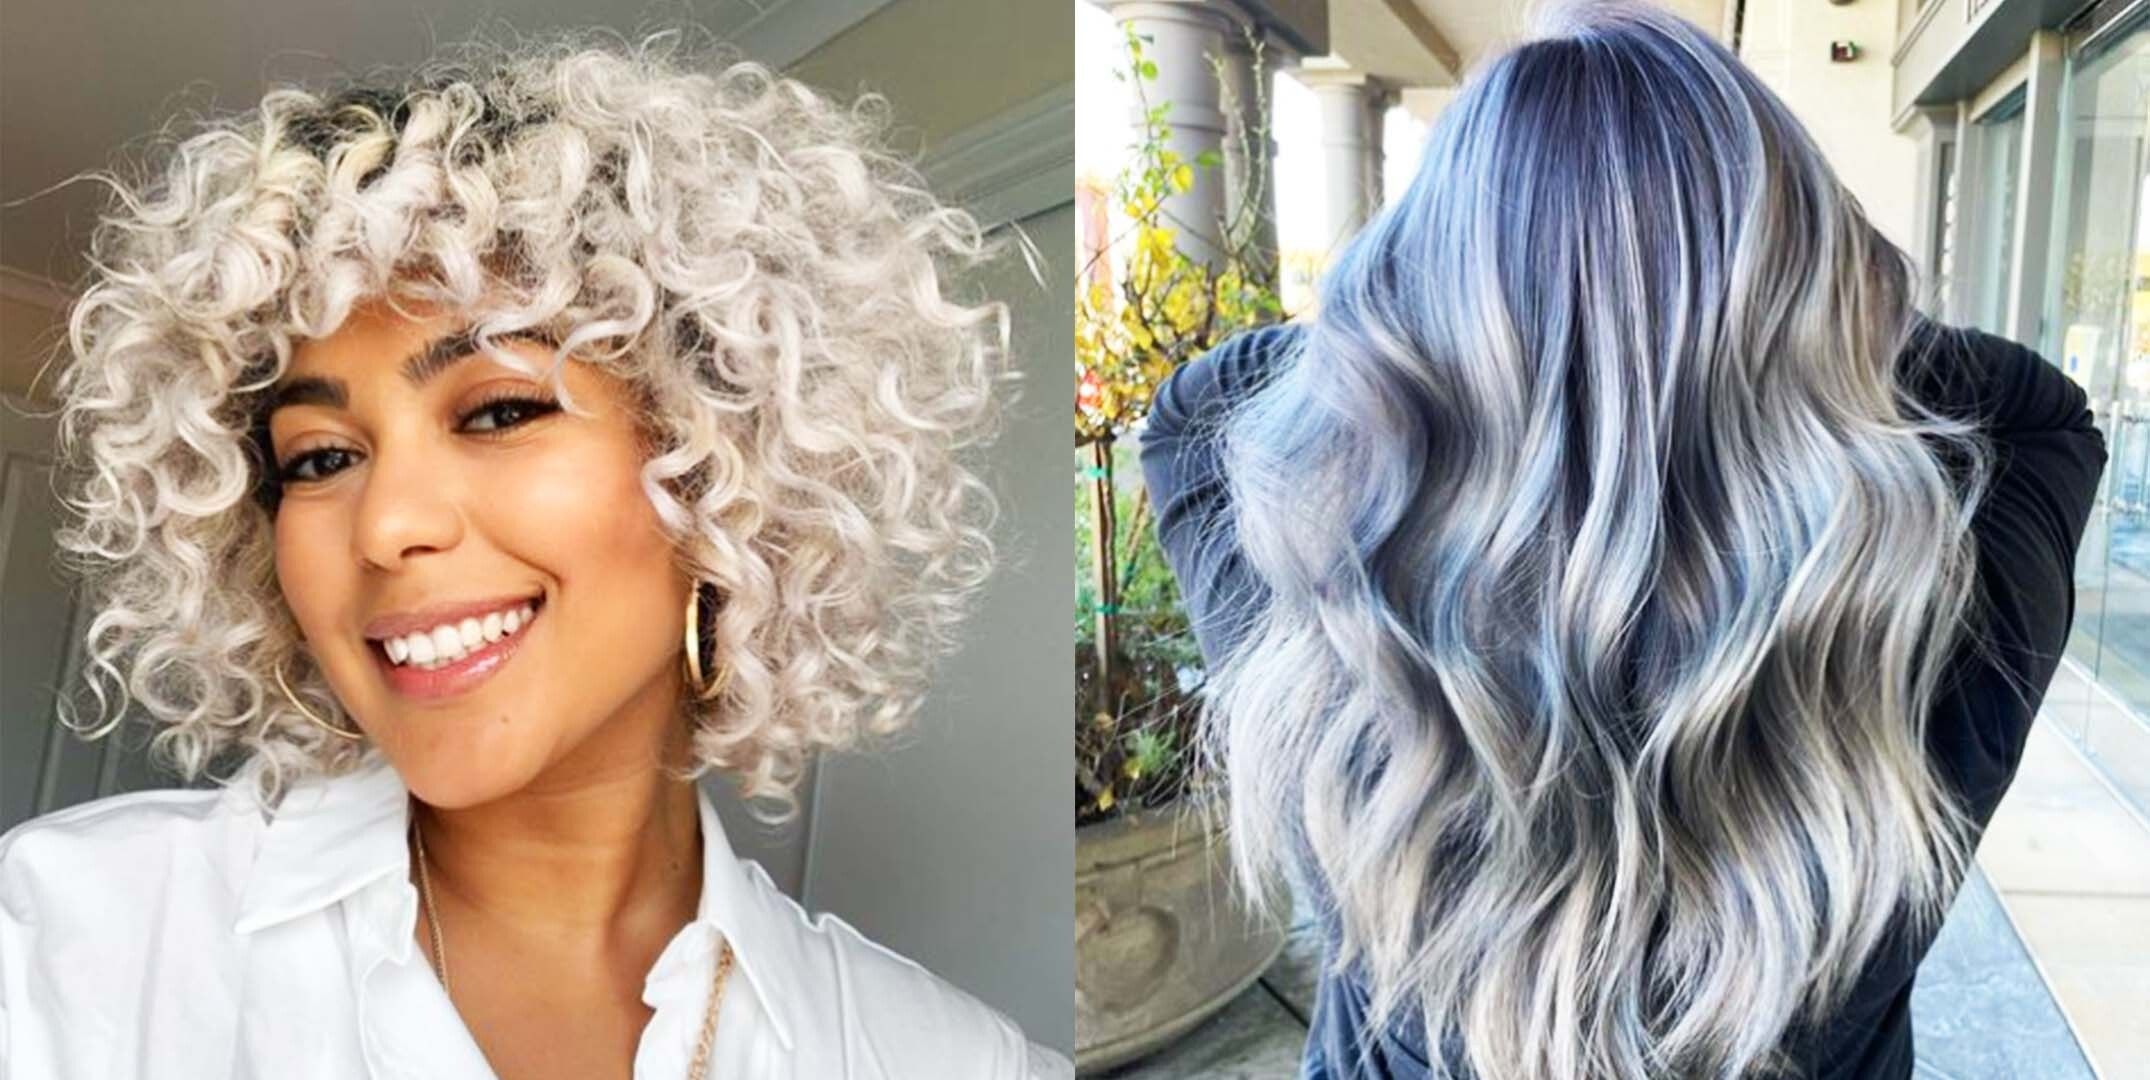 2. "Blue and Gray Hair Dye Tutorial: Tips and Tricks for a Perfect Blend" - wide 7